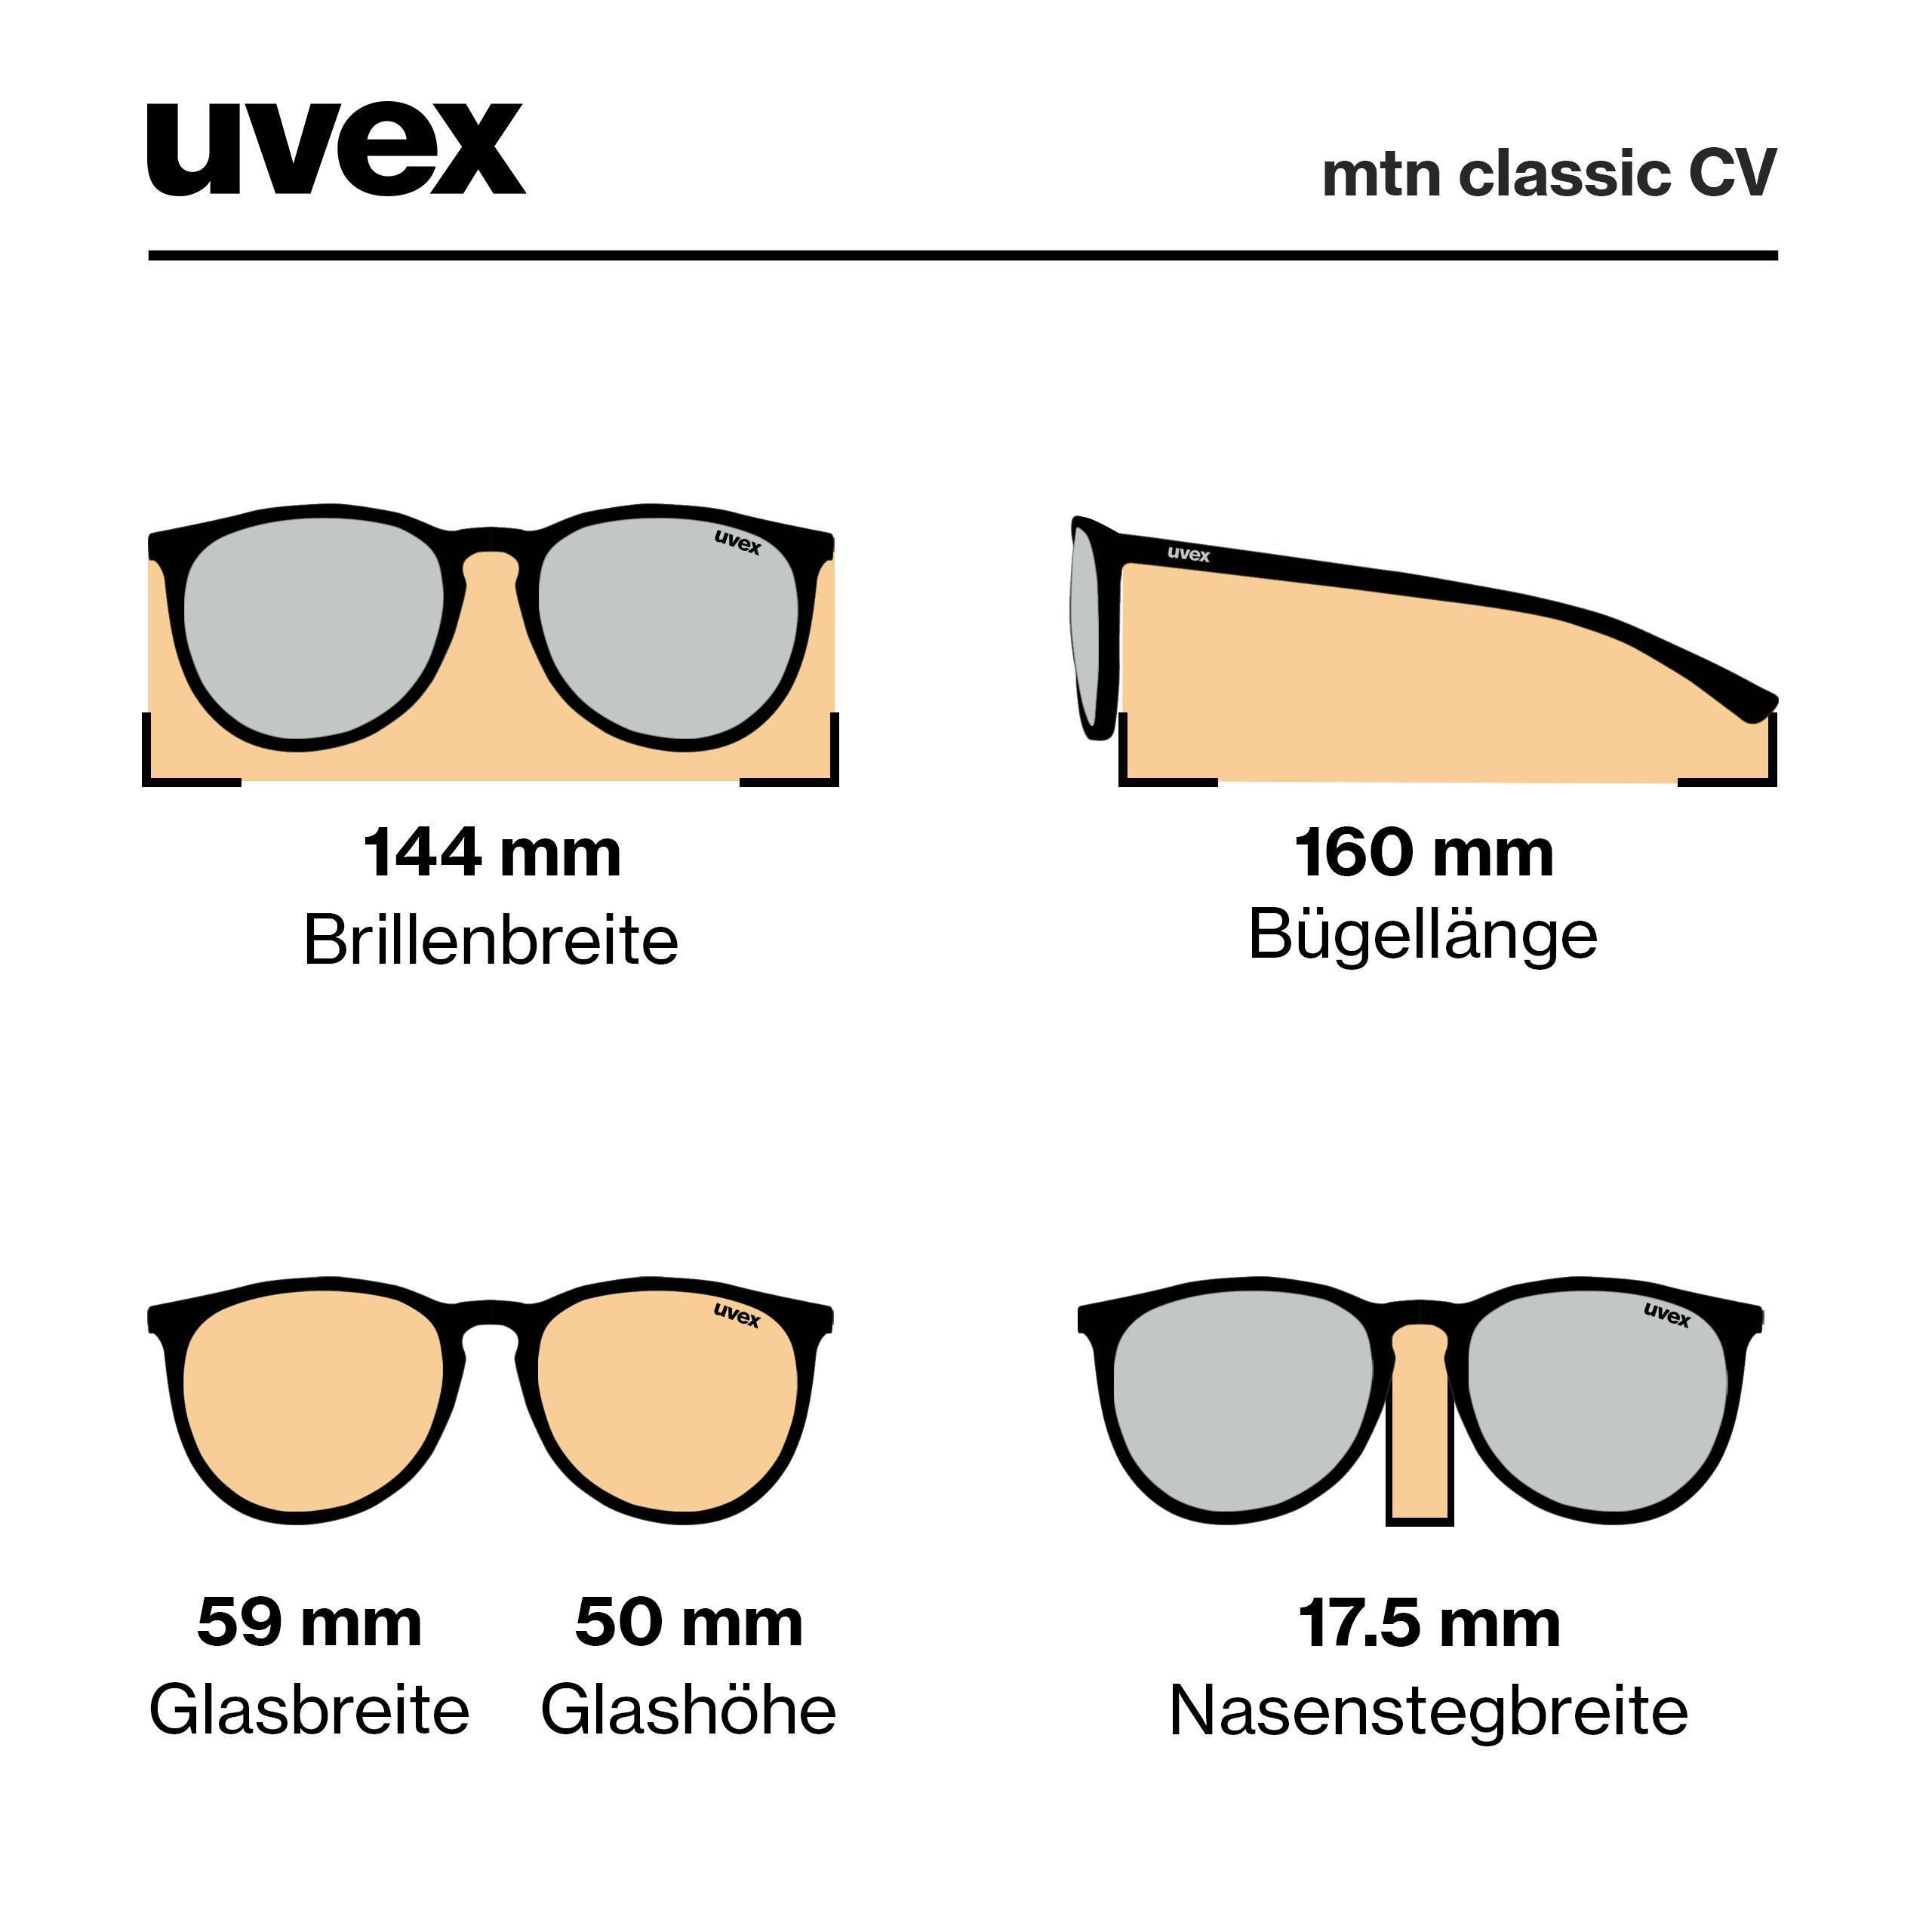 Choosing the right frame size for your glasses | Vision Express